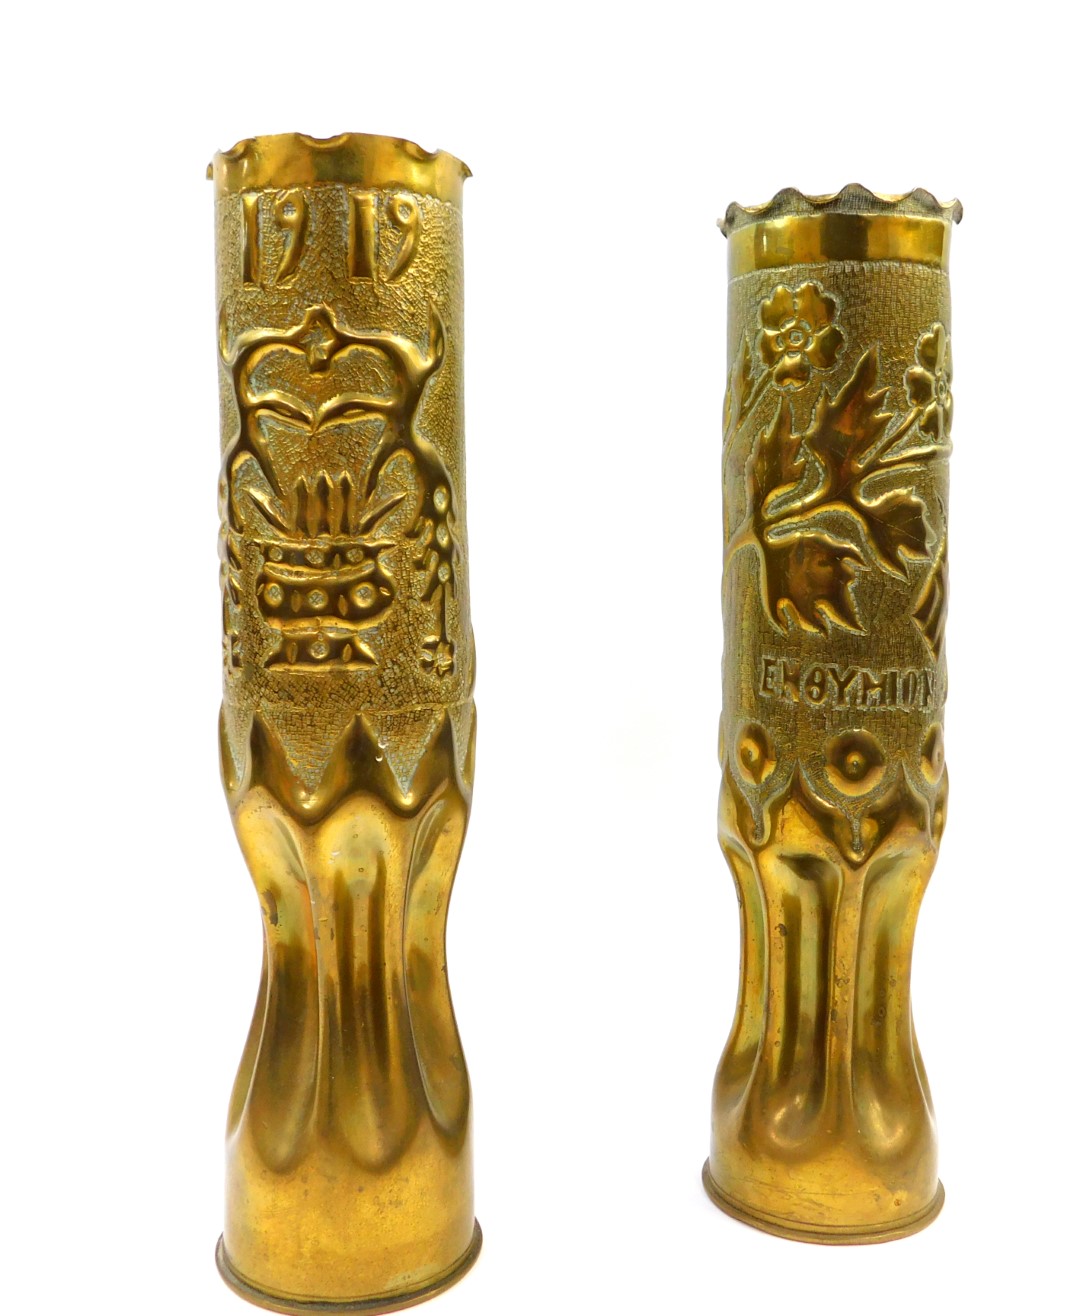 A pair of Greek WWI trench art brass shell cases, one embossed with crossed flags, a crown, flowers, - Image 2 of 4